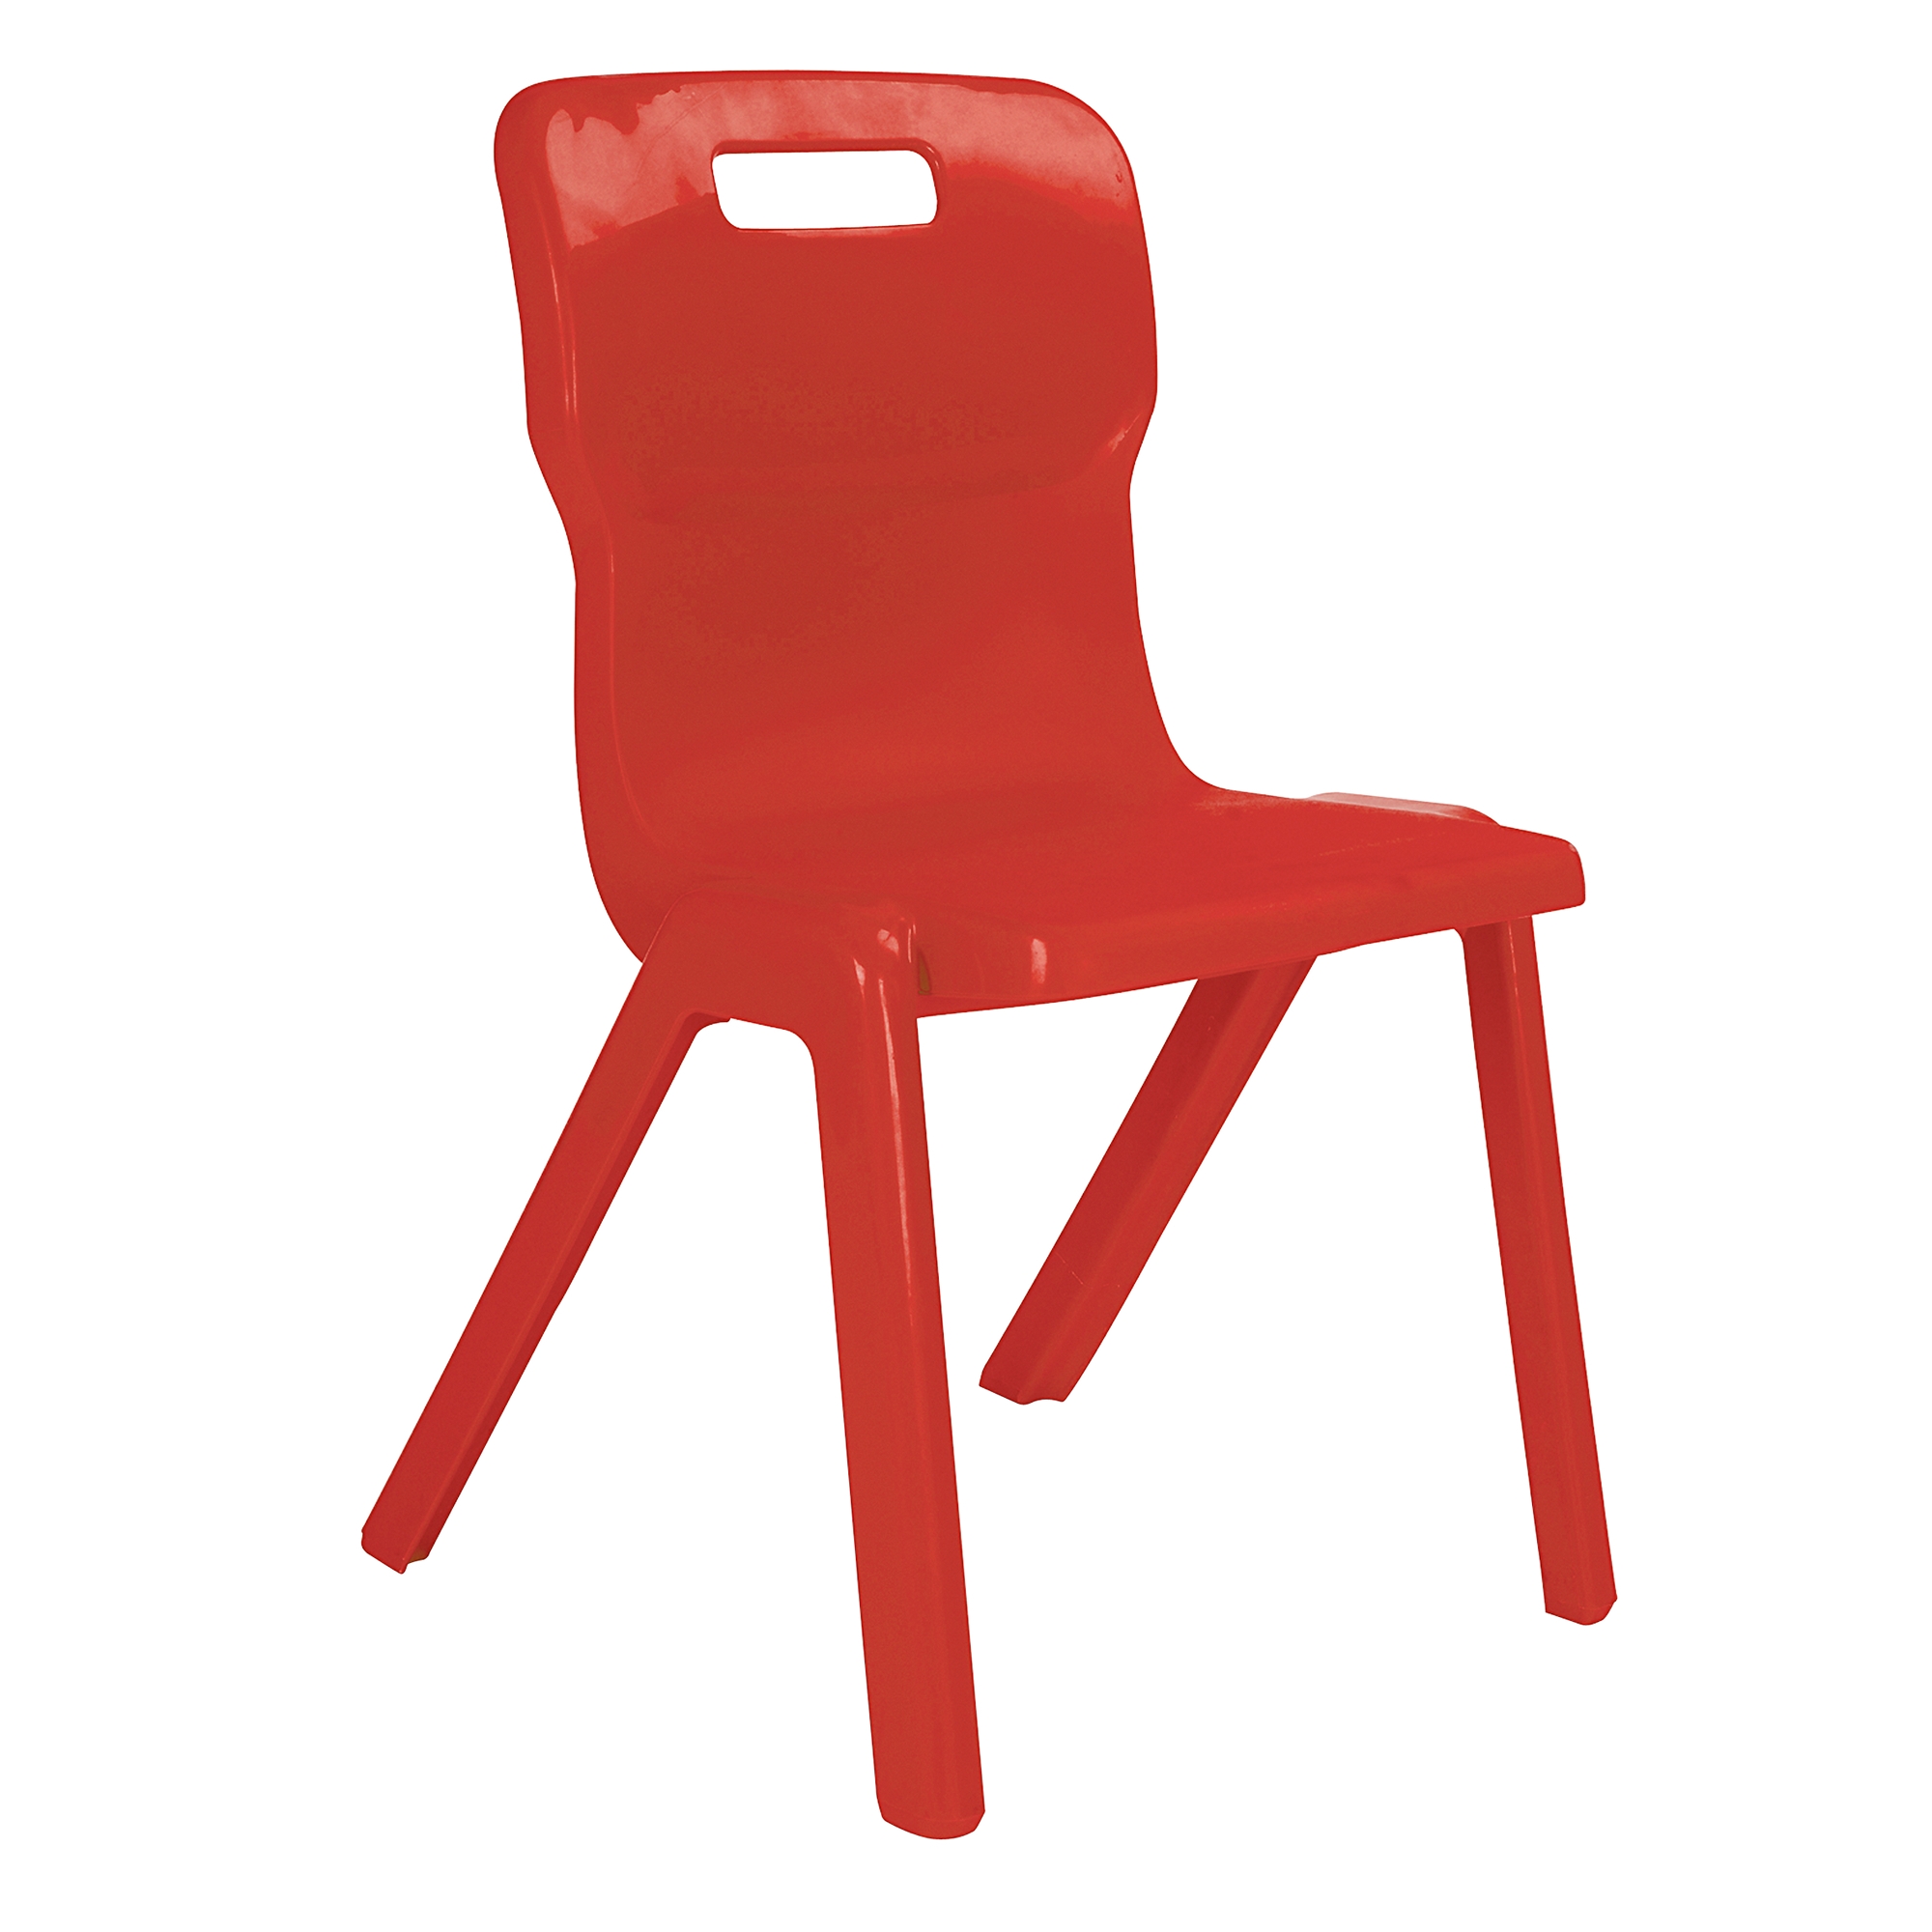 One Piece Titan Chair - Size 2 Ages 4-6 Red